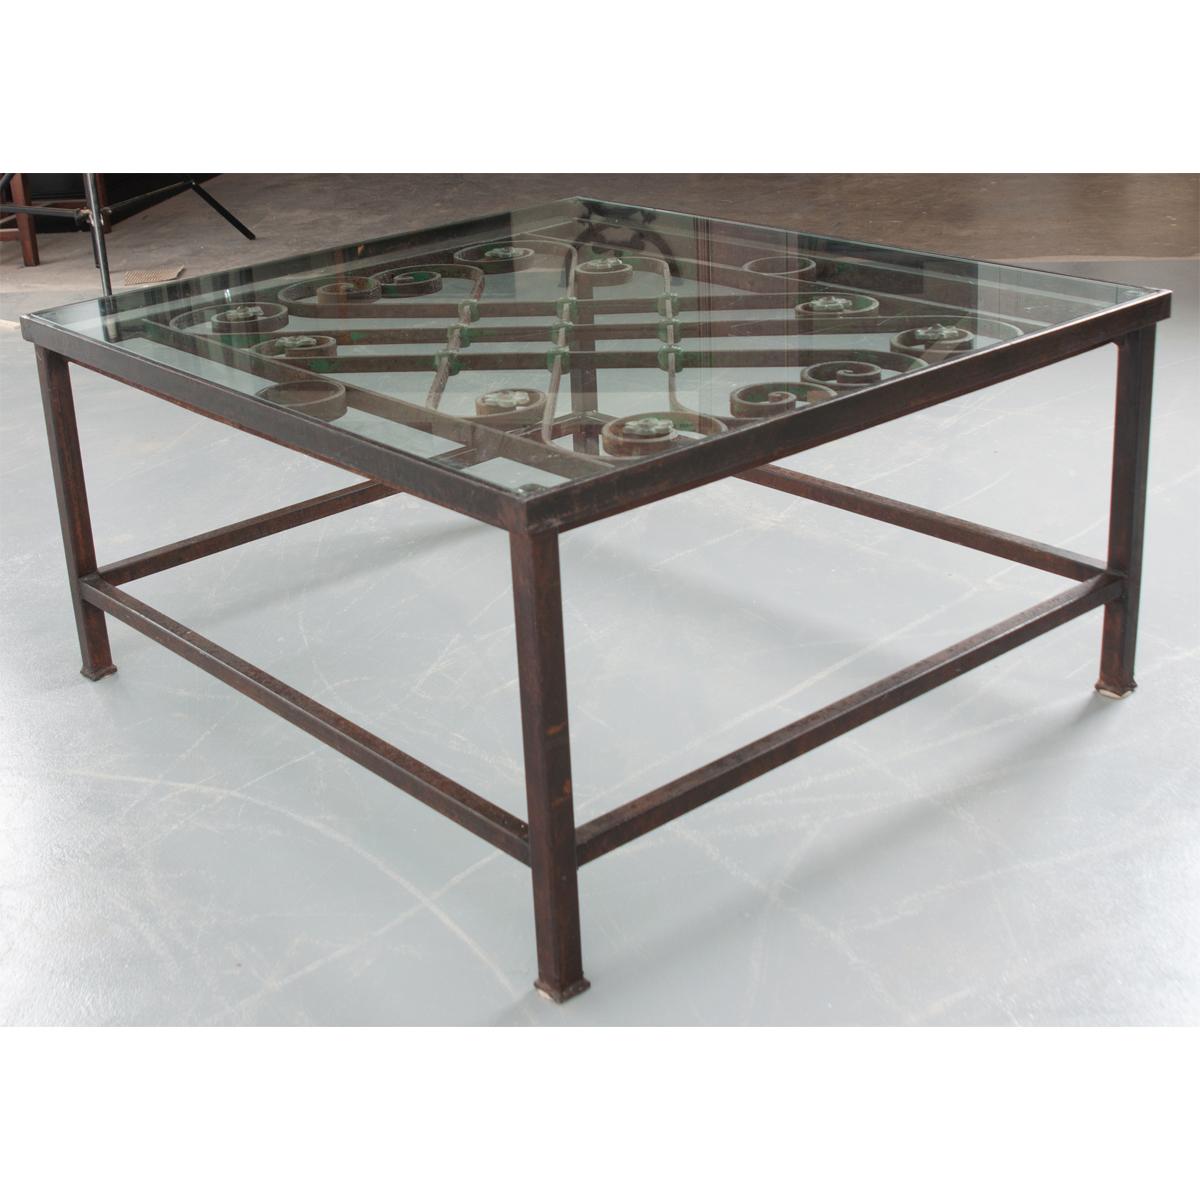 20th Century French Antique Iron Architectural Fragment and Glass Coffee Table For Sale